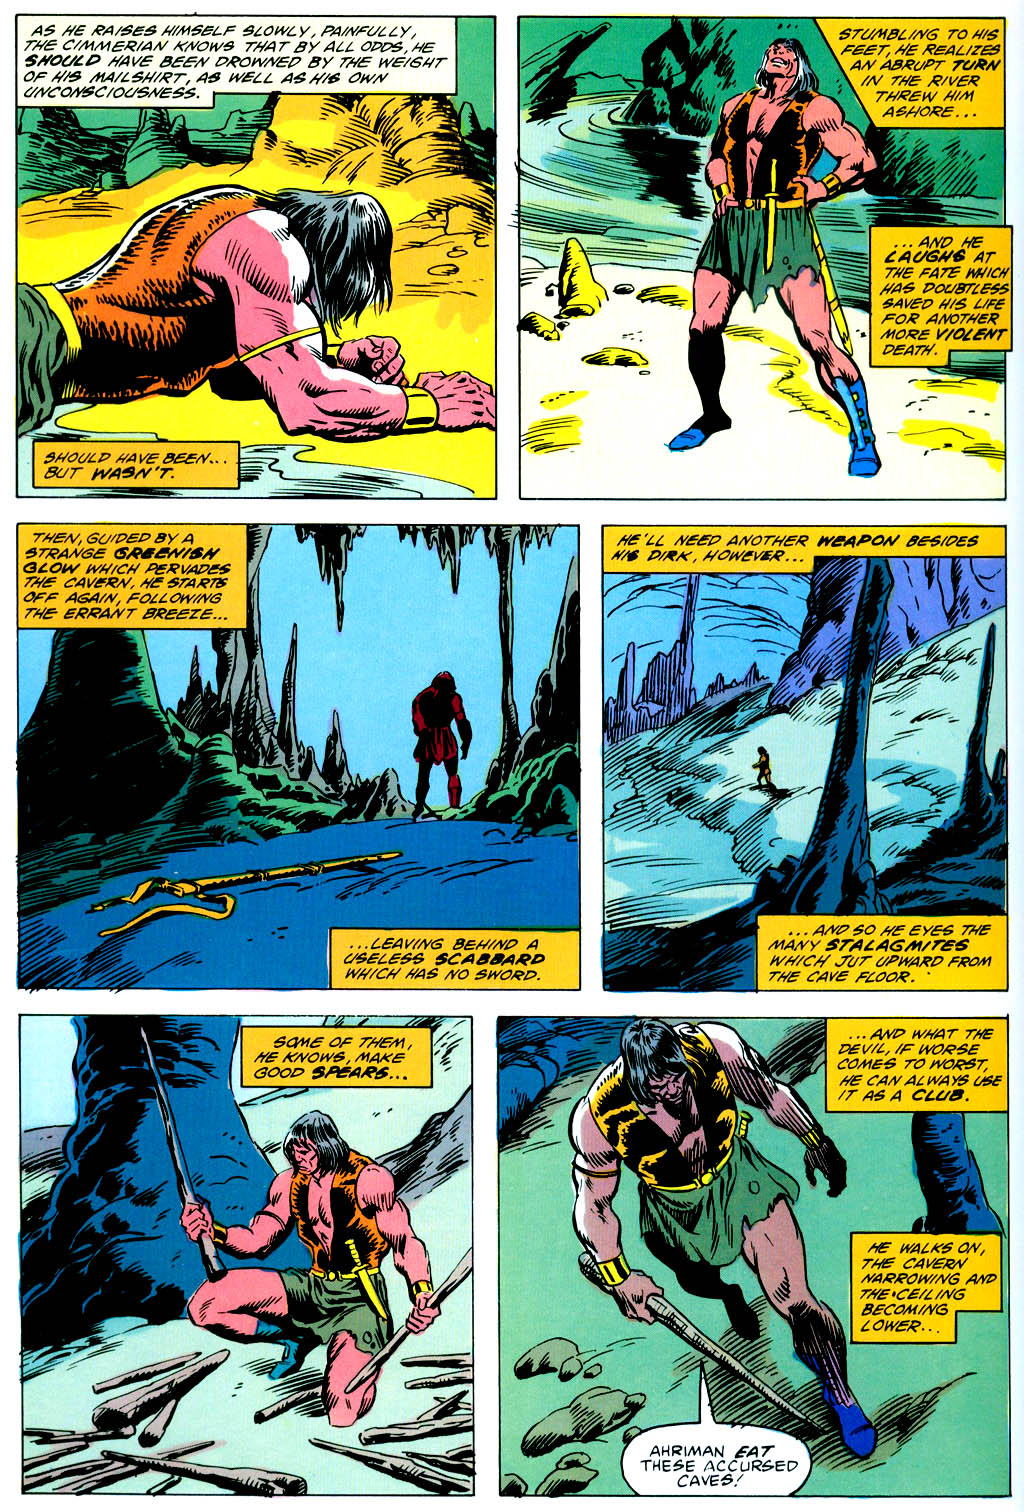 Read online Marvel Graphic Novel comic -  Issue #42 - Conan of the Isles - 79